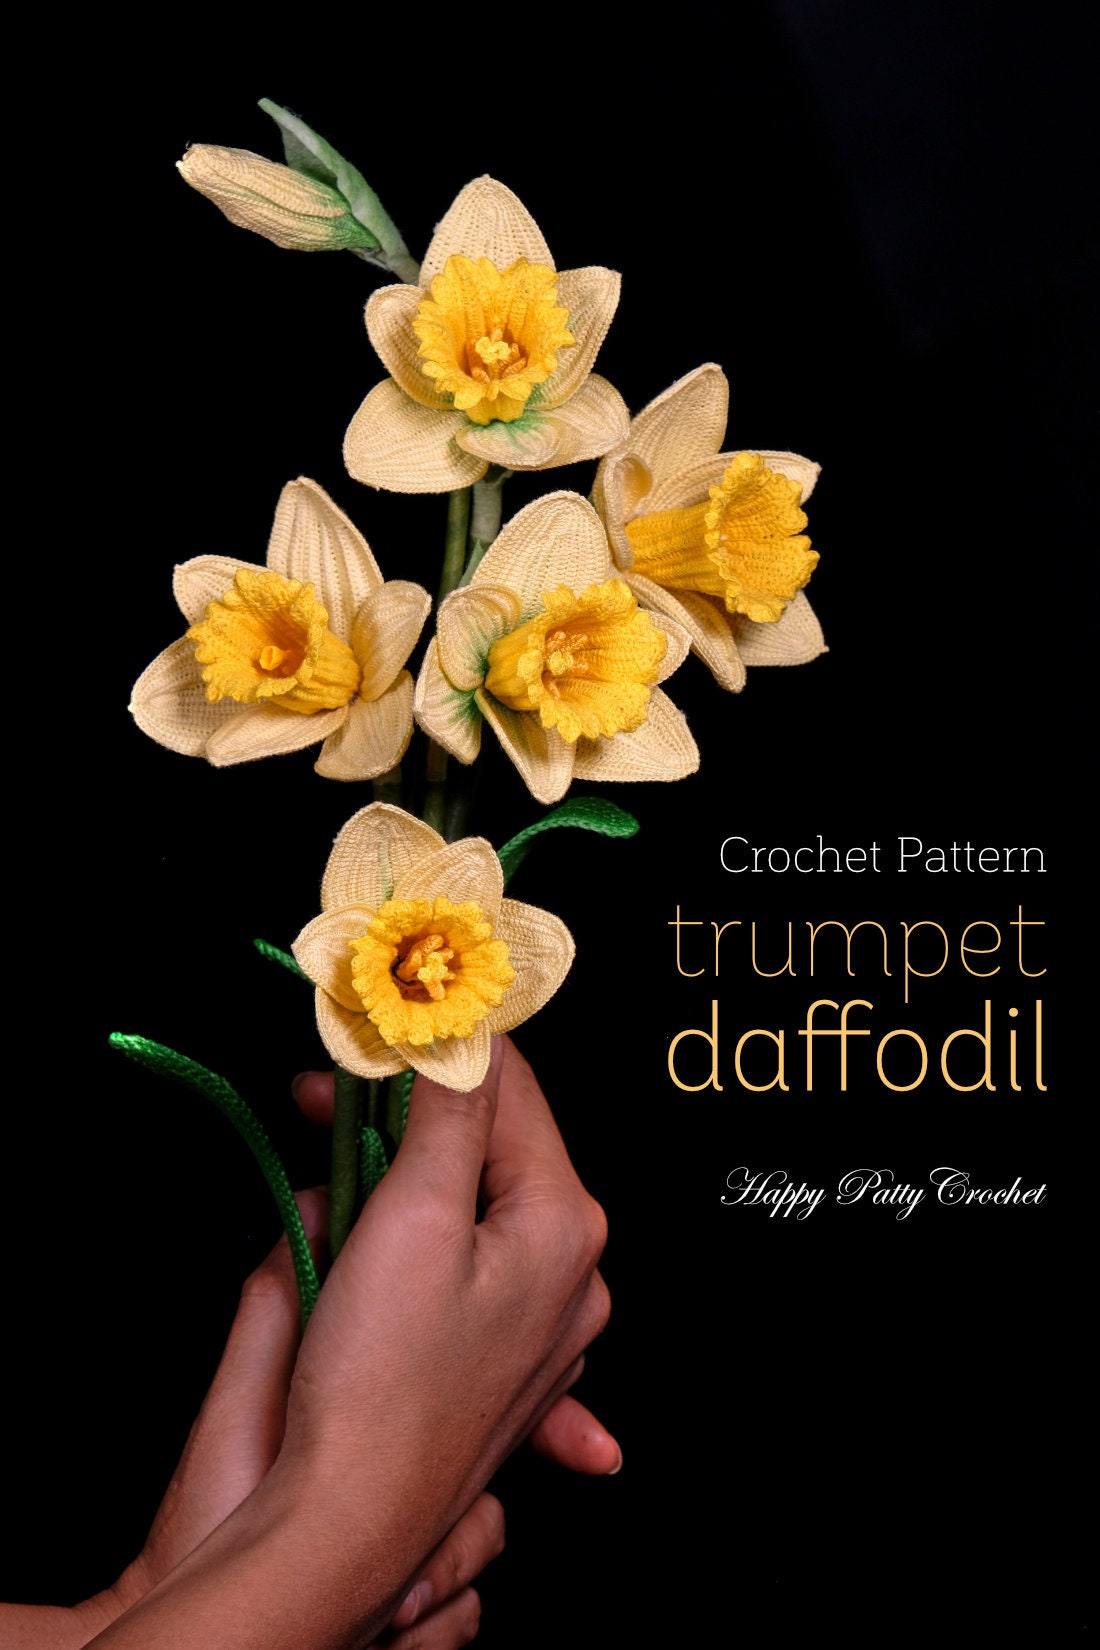 Crochet Pattern for a Trumpet Daffodil Flower - Flower Pattern for a Crochet Daffodil Flower - Crochet Narcissus Pattern